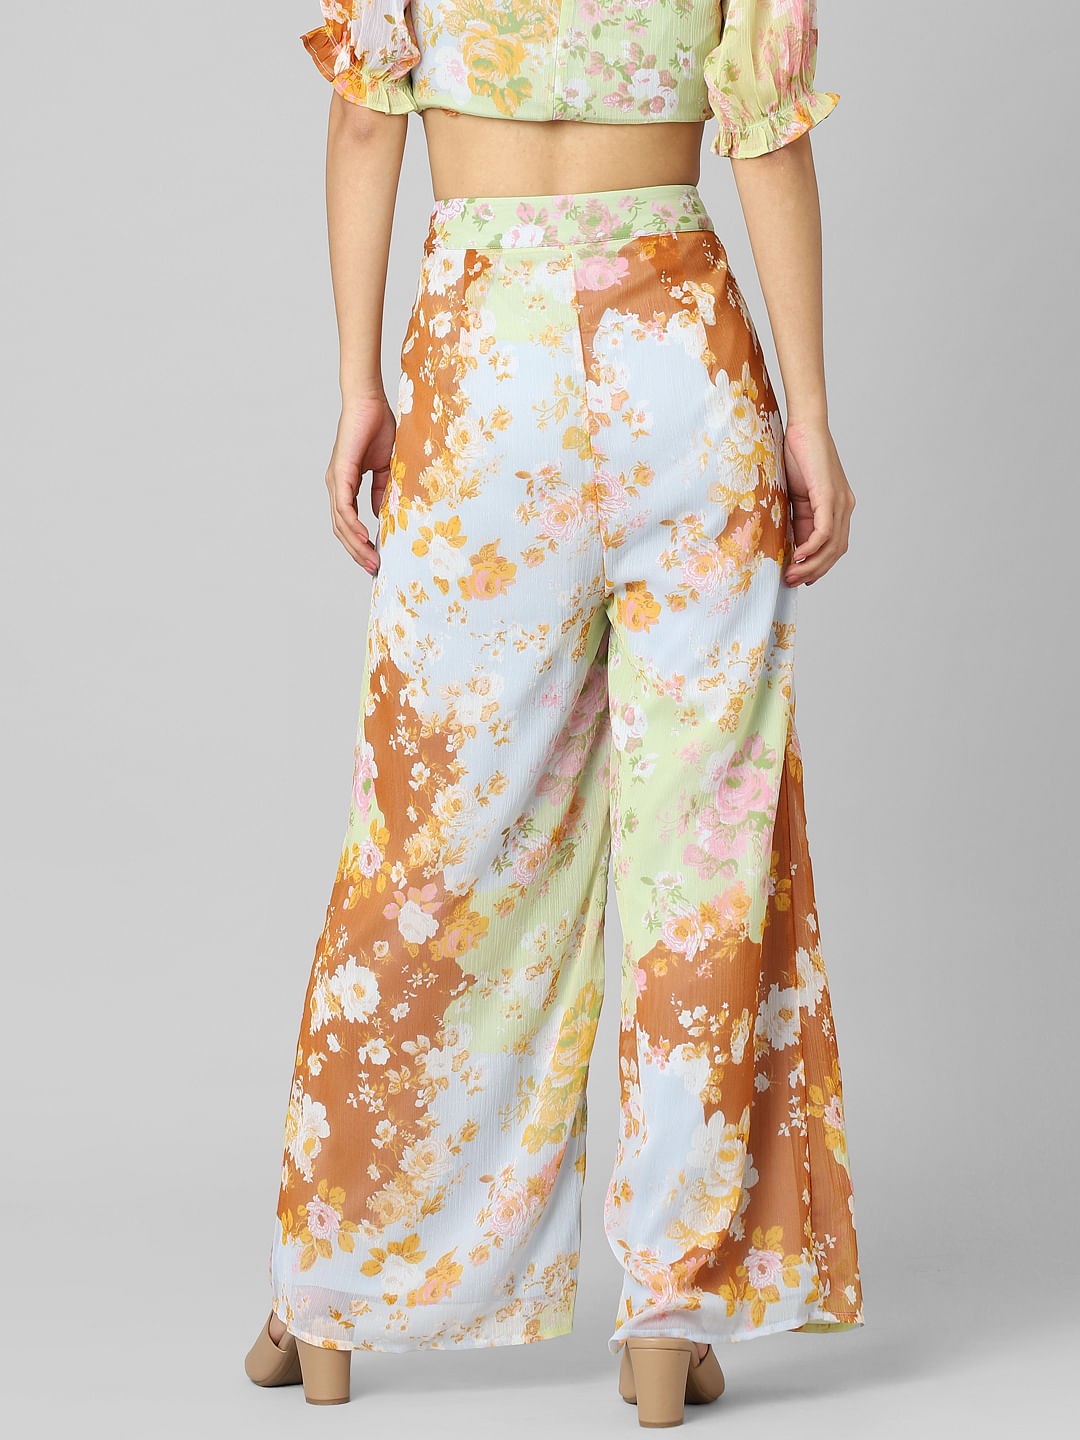 Ladies Womens Floral Print Palazzo Trousers Loose Flared Stretchy Wide Leg  Pants | eBay